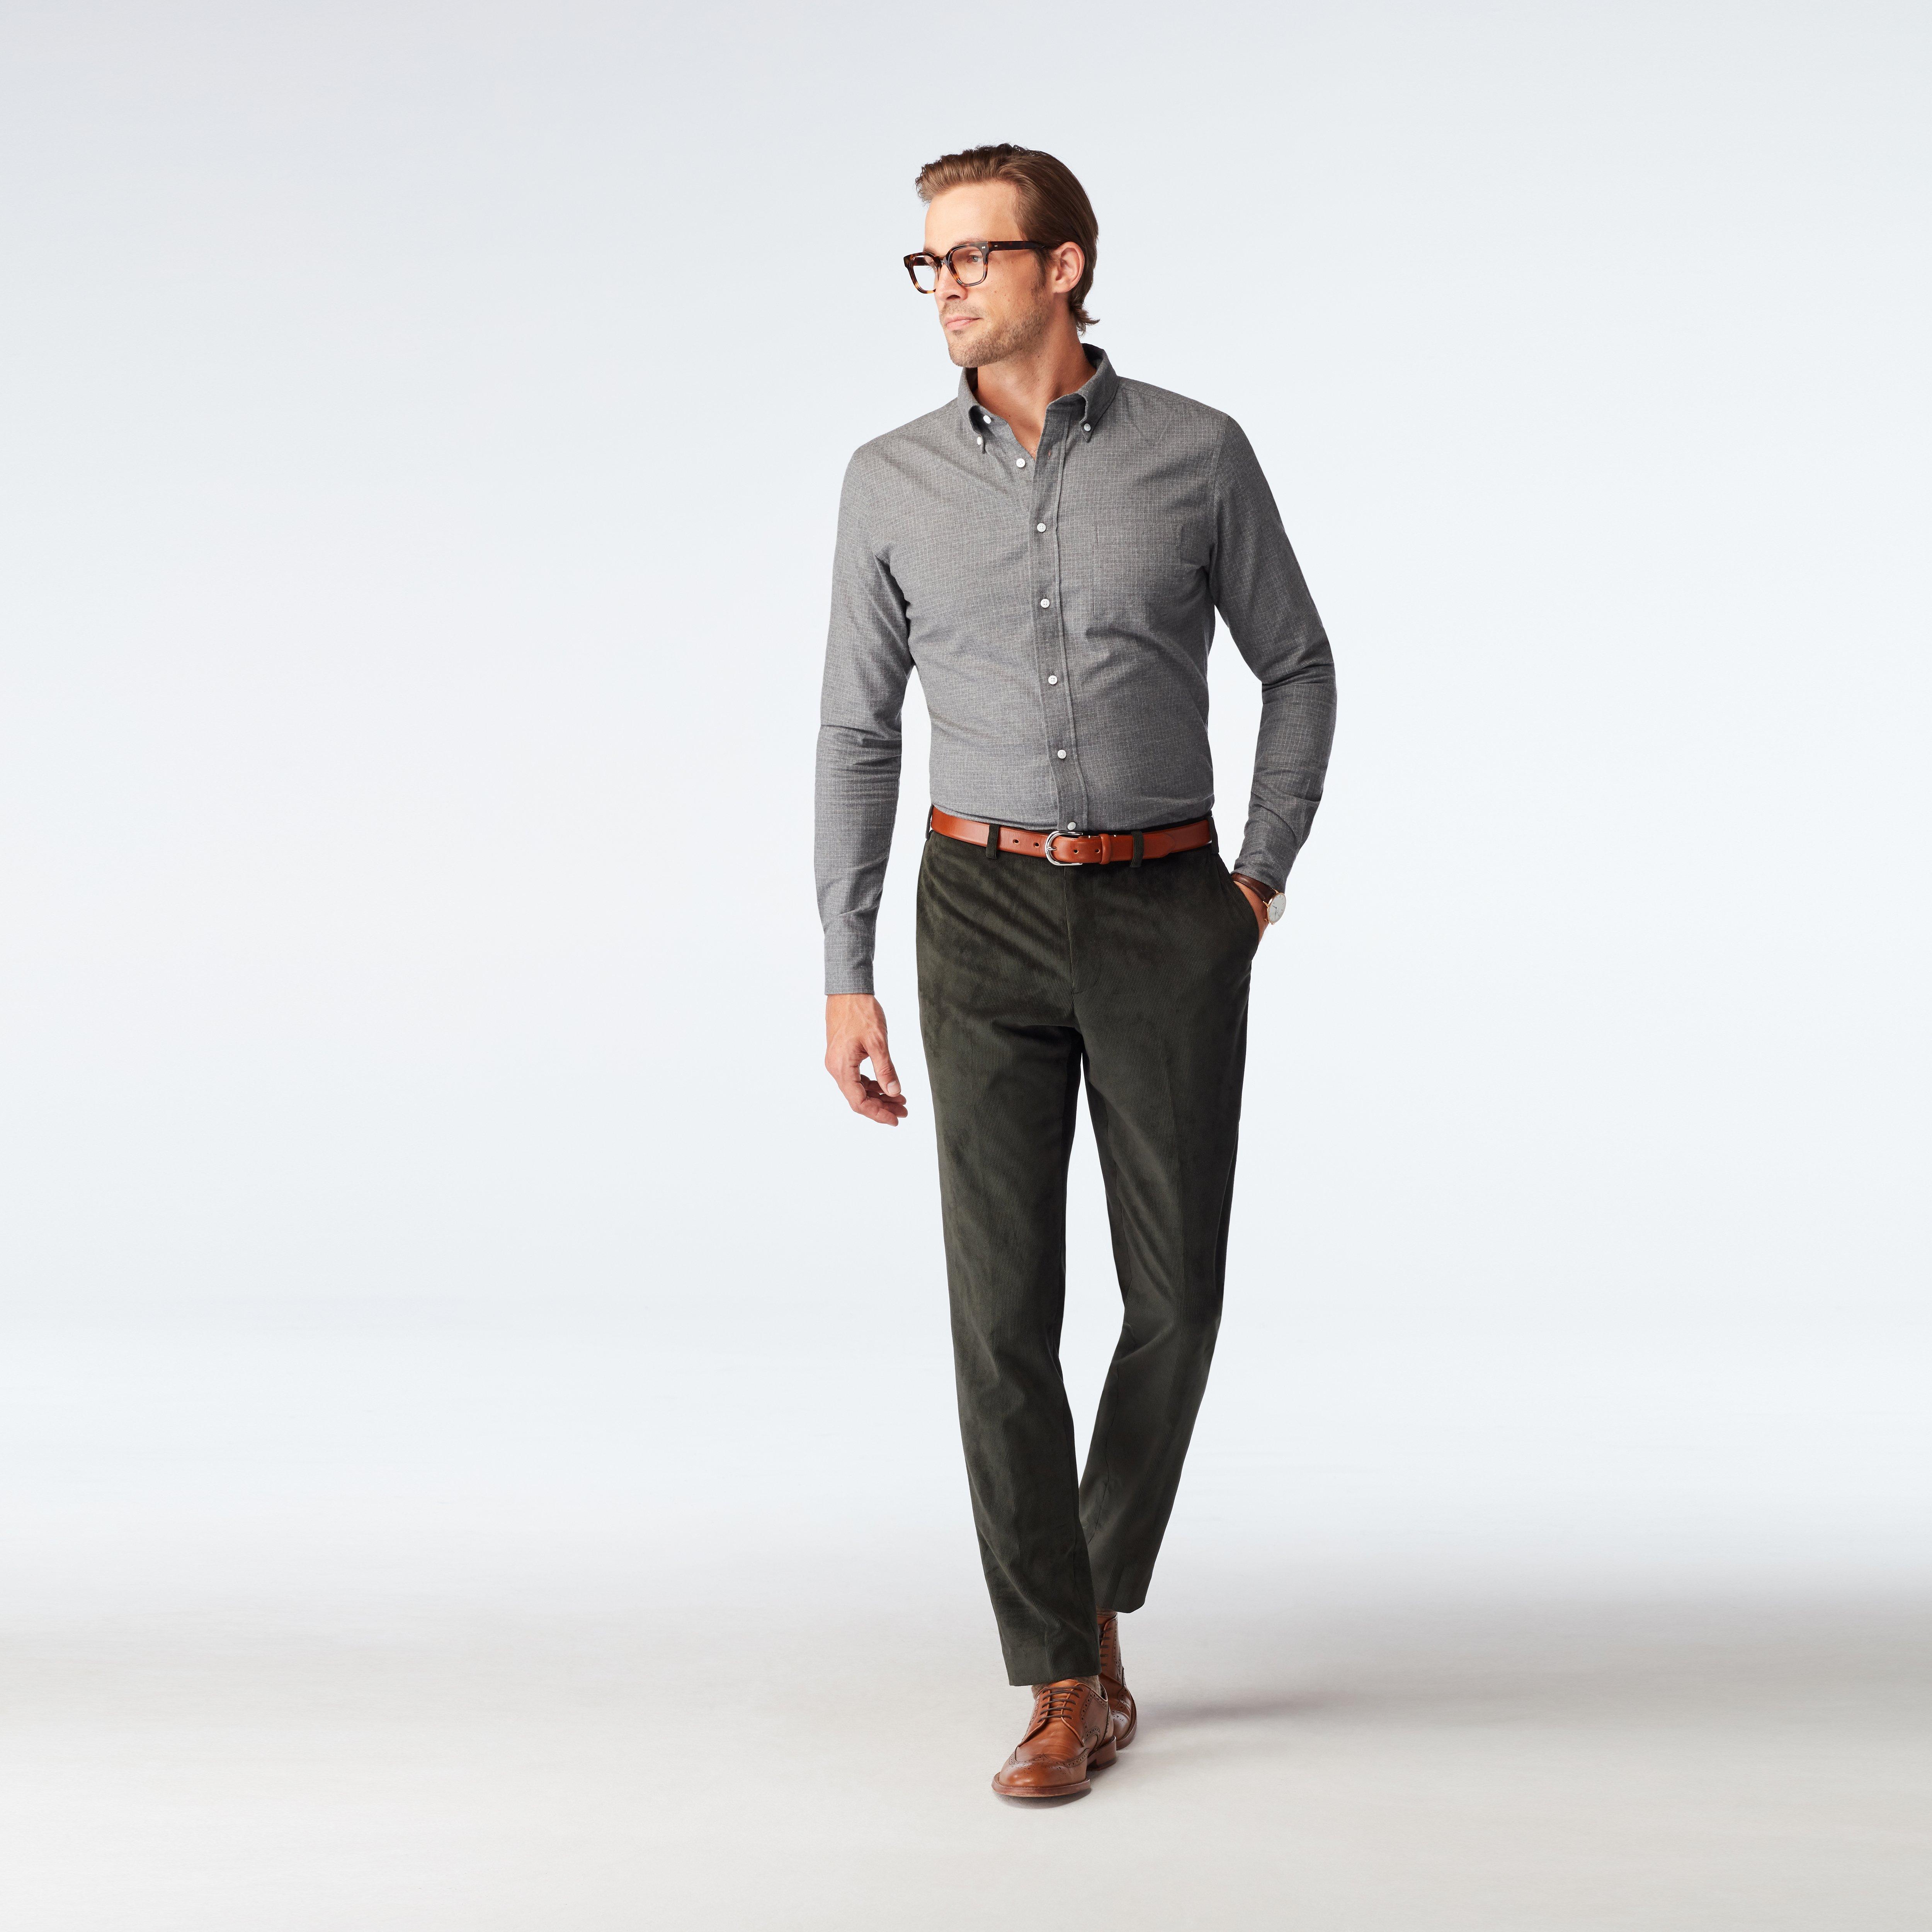 Custom Pants Made For You - Flaxton Corduroy Olive Casual Pants | INDOCHINO